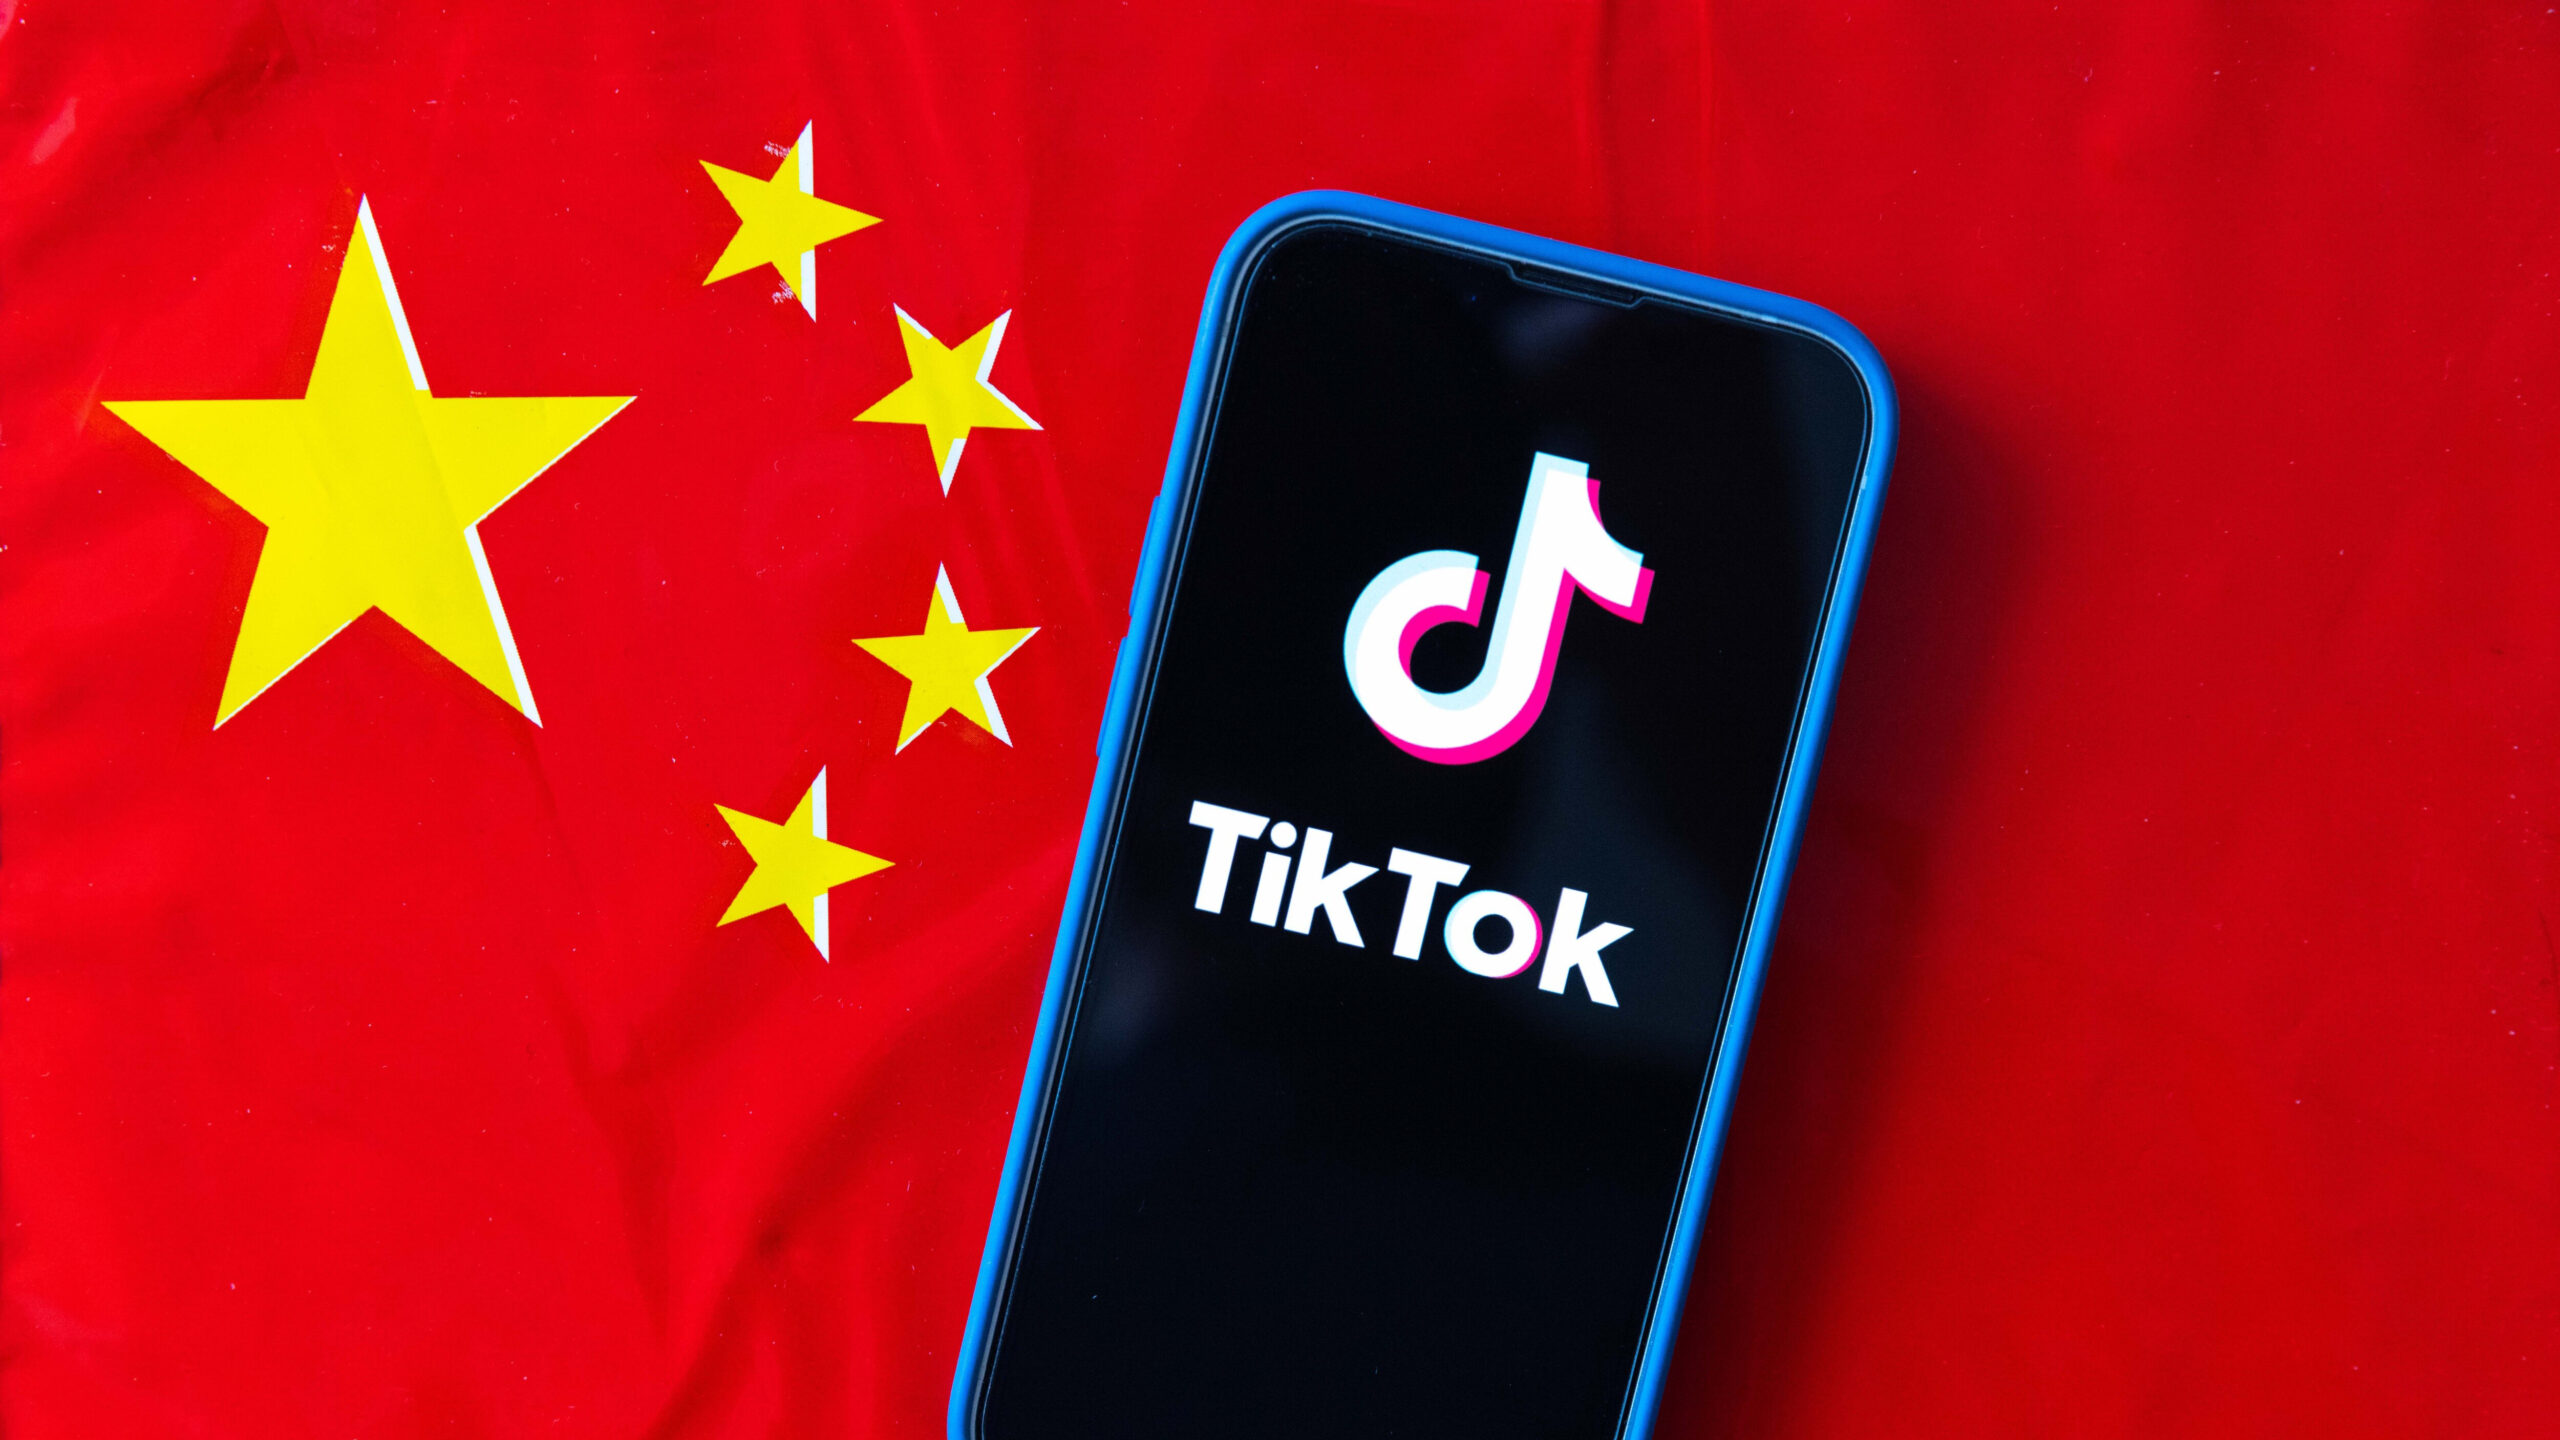 TikTok Fanatic Threatens U.S. Senator Over Bill To Force Sale Of App: ‘I Will Find You And Shoot You’